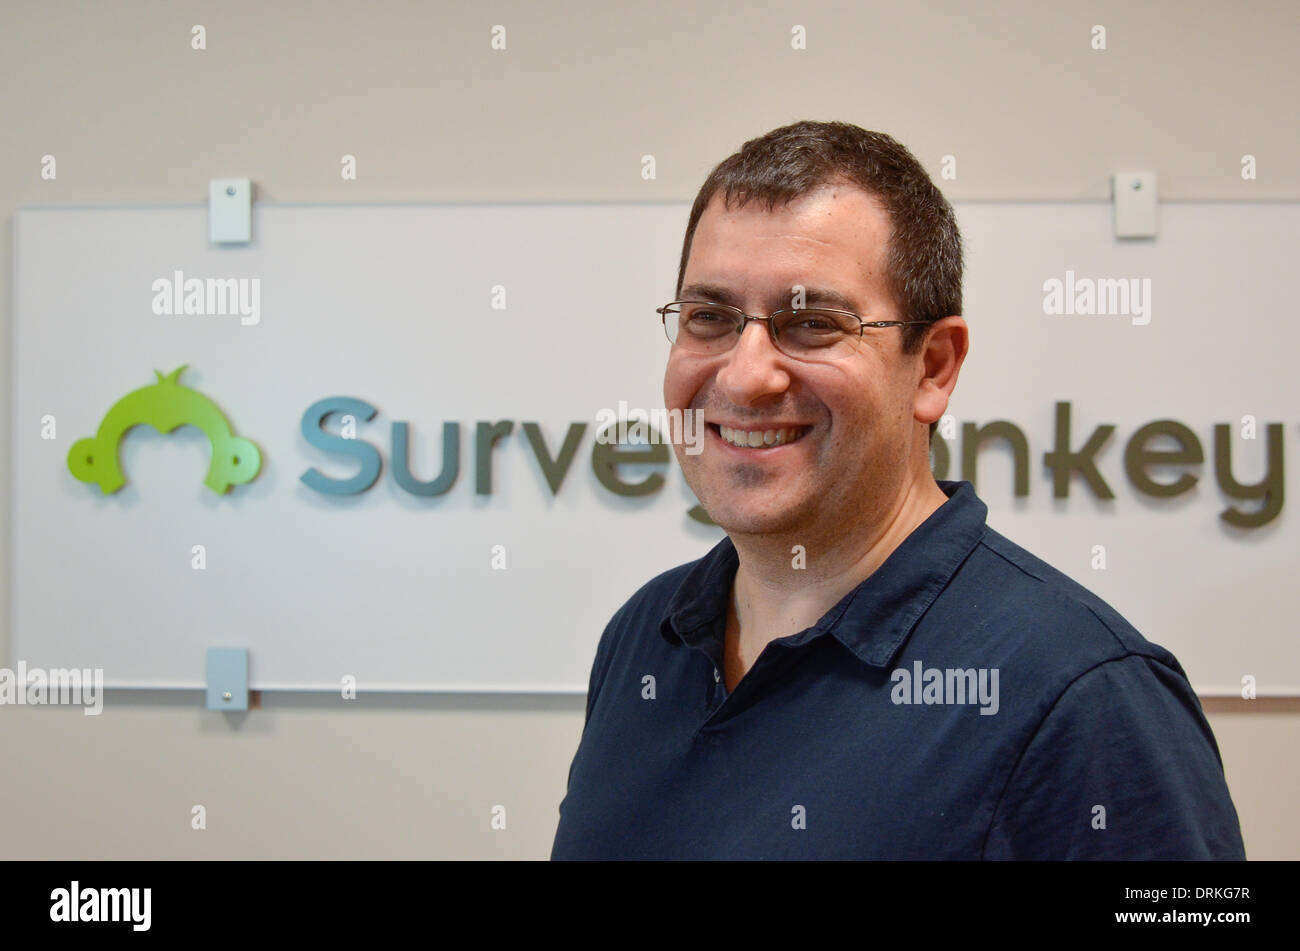 David Goldberg, CEO of online market researcher SurveyMonkey, in front of the company logo at headquarters in Palo Alto, California. Goldberg, a former Yahoo executive, is the husband of Facebook COO and 'Lean In' author Sheryl Sandberg. - 2013. Stock Photo